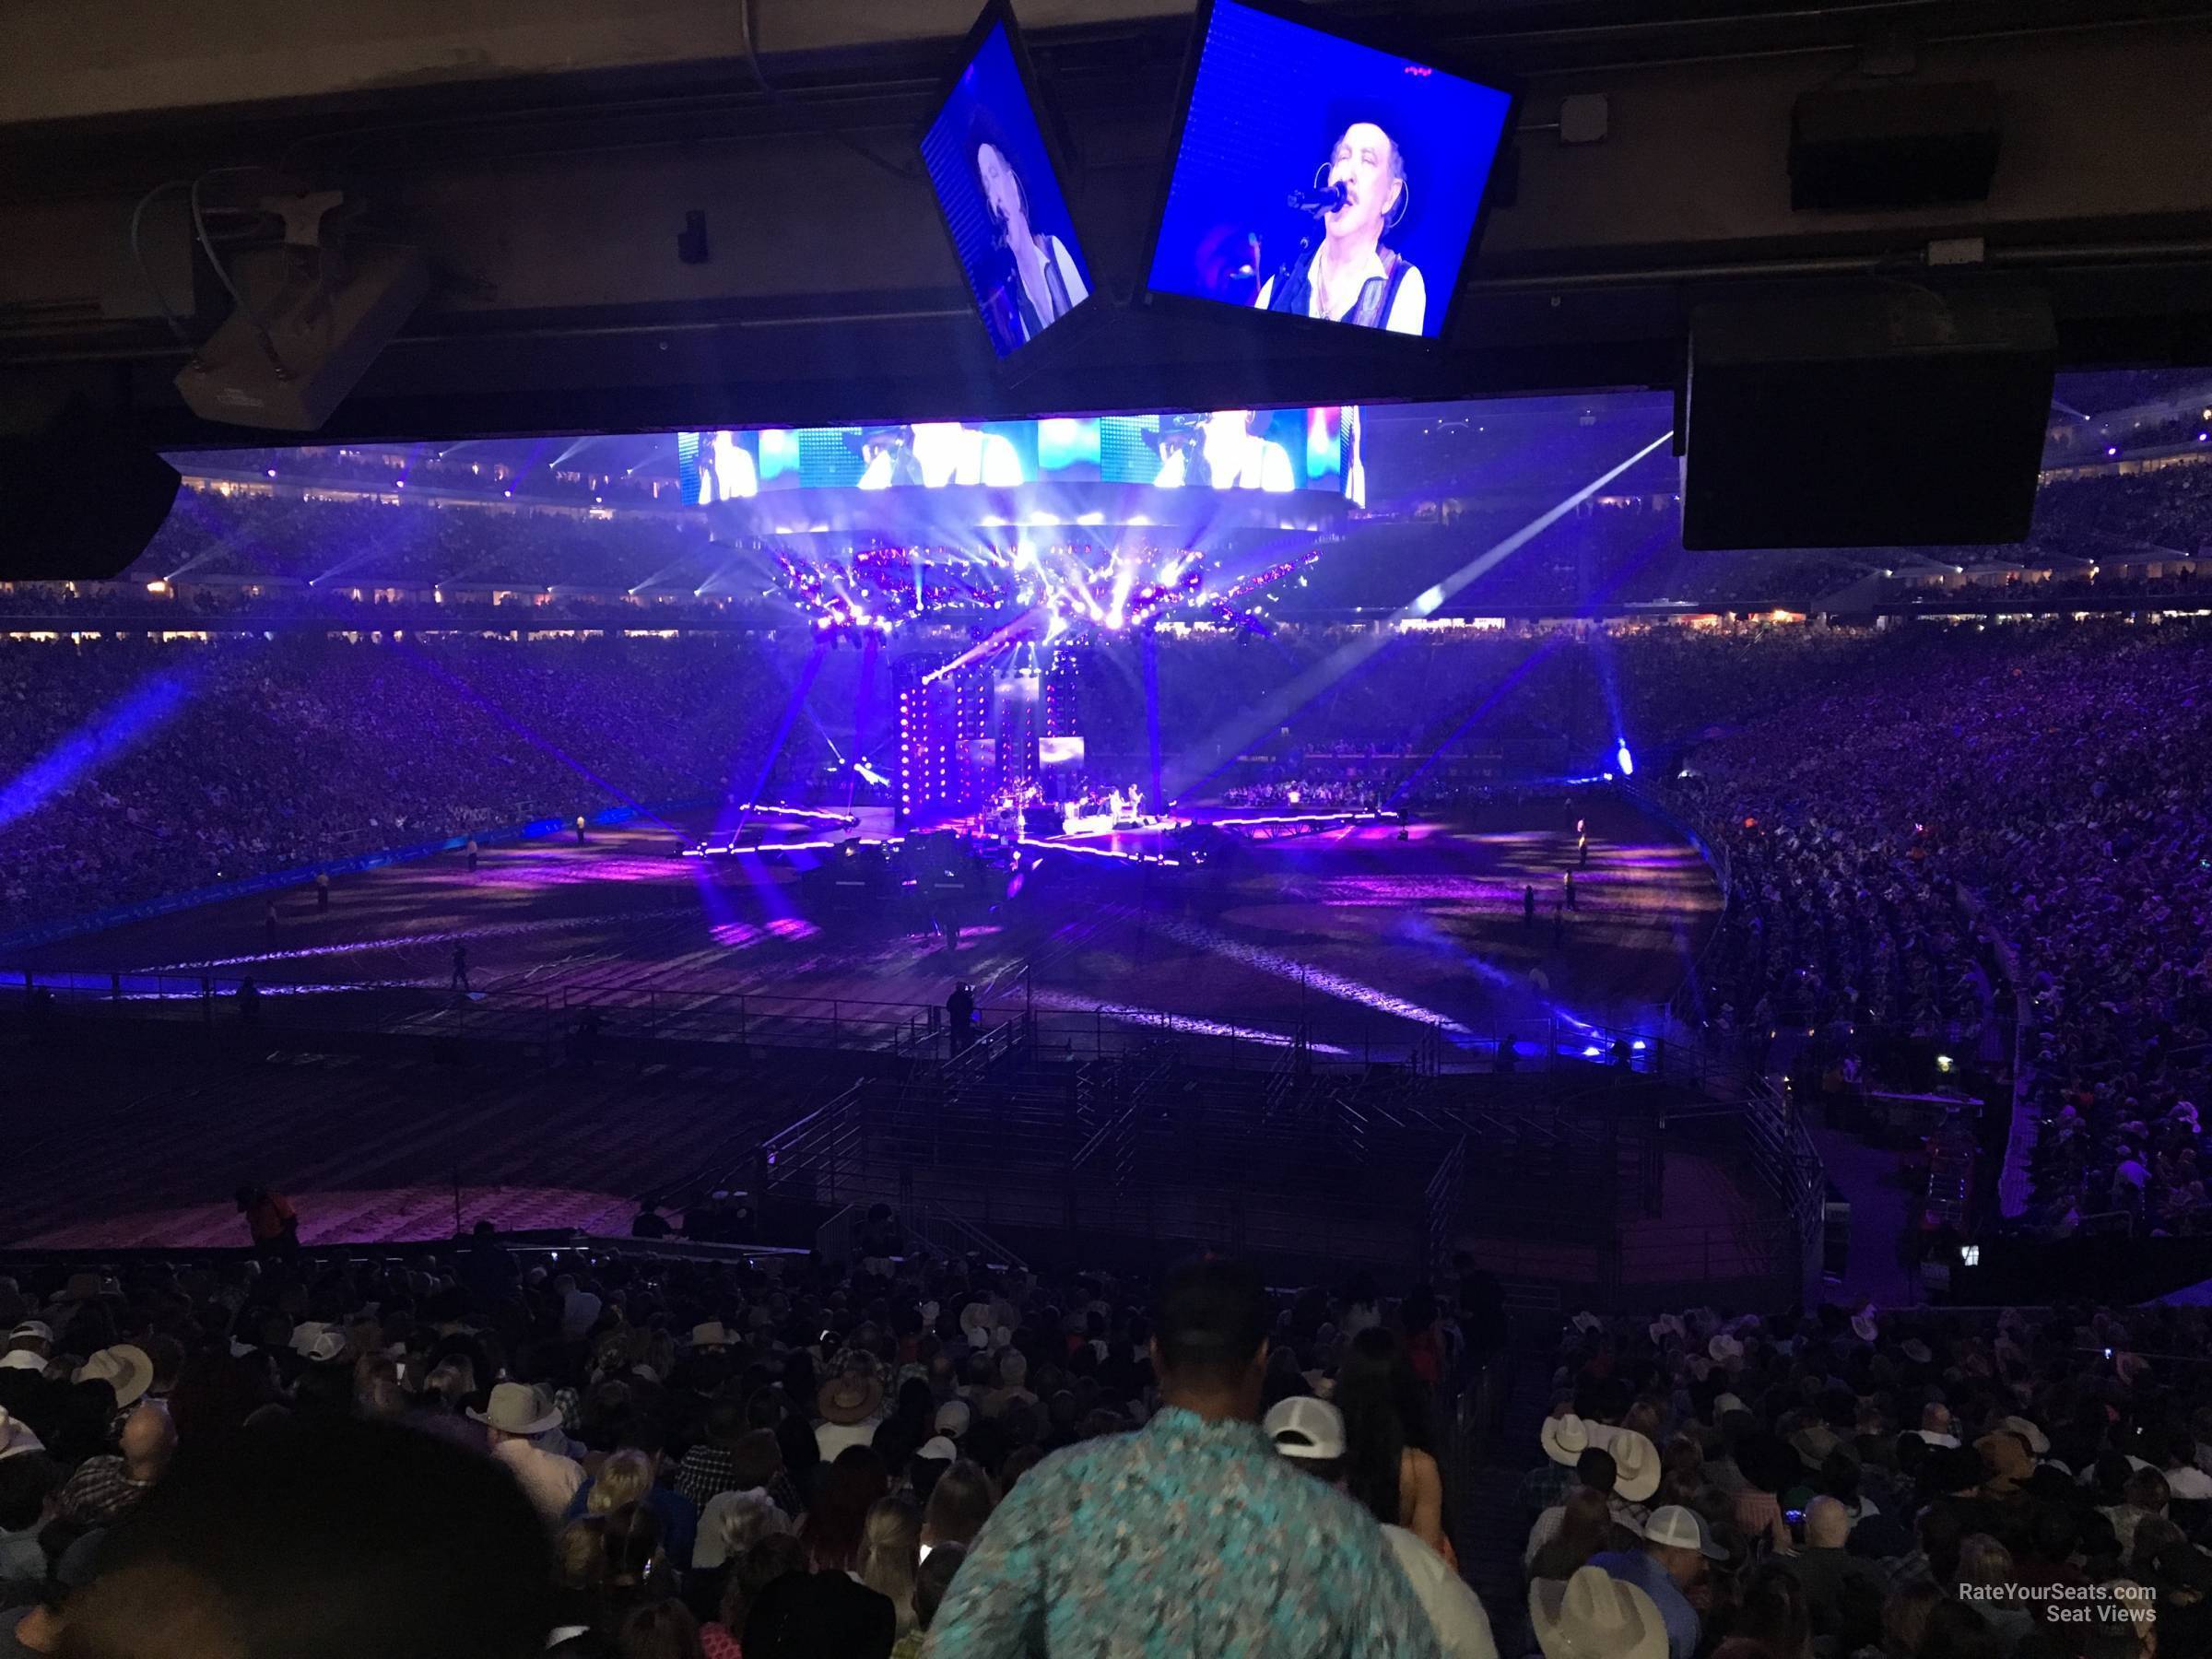 section 135, row hh seat view  for concert - nrg stadium